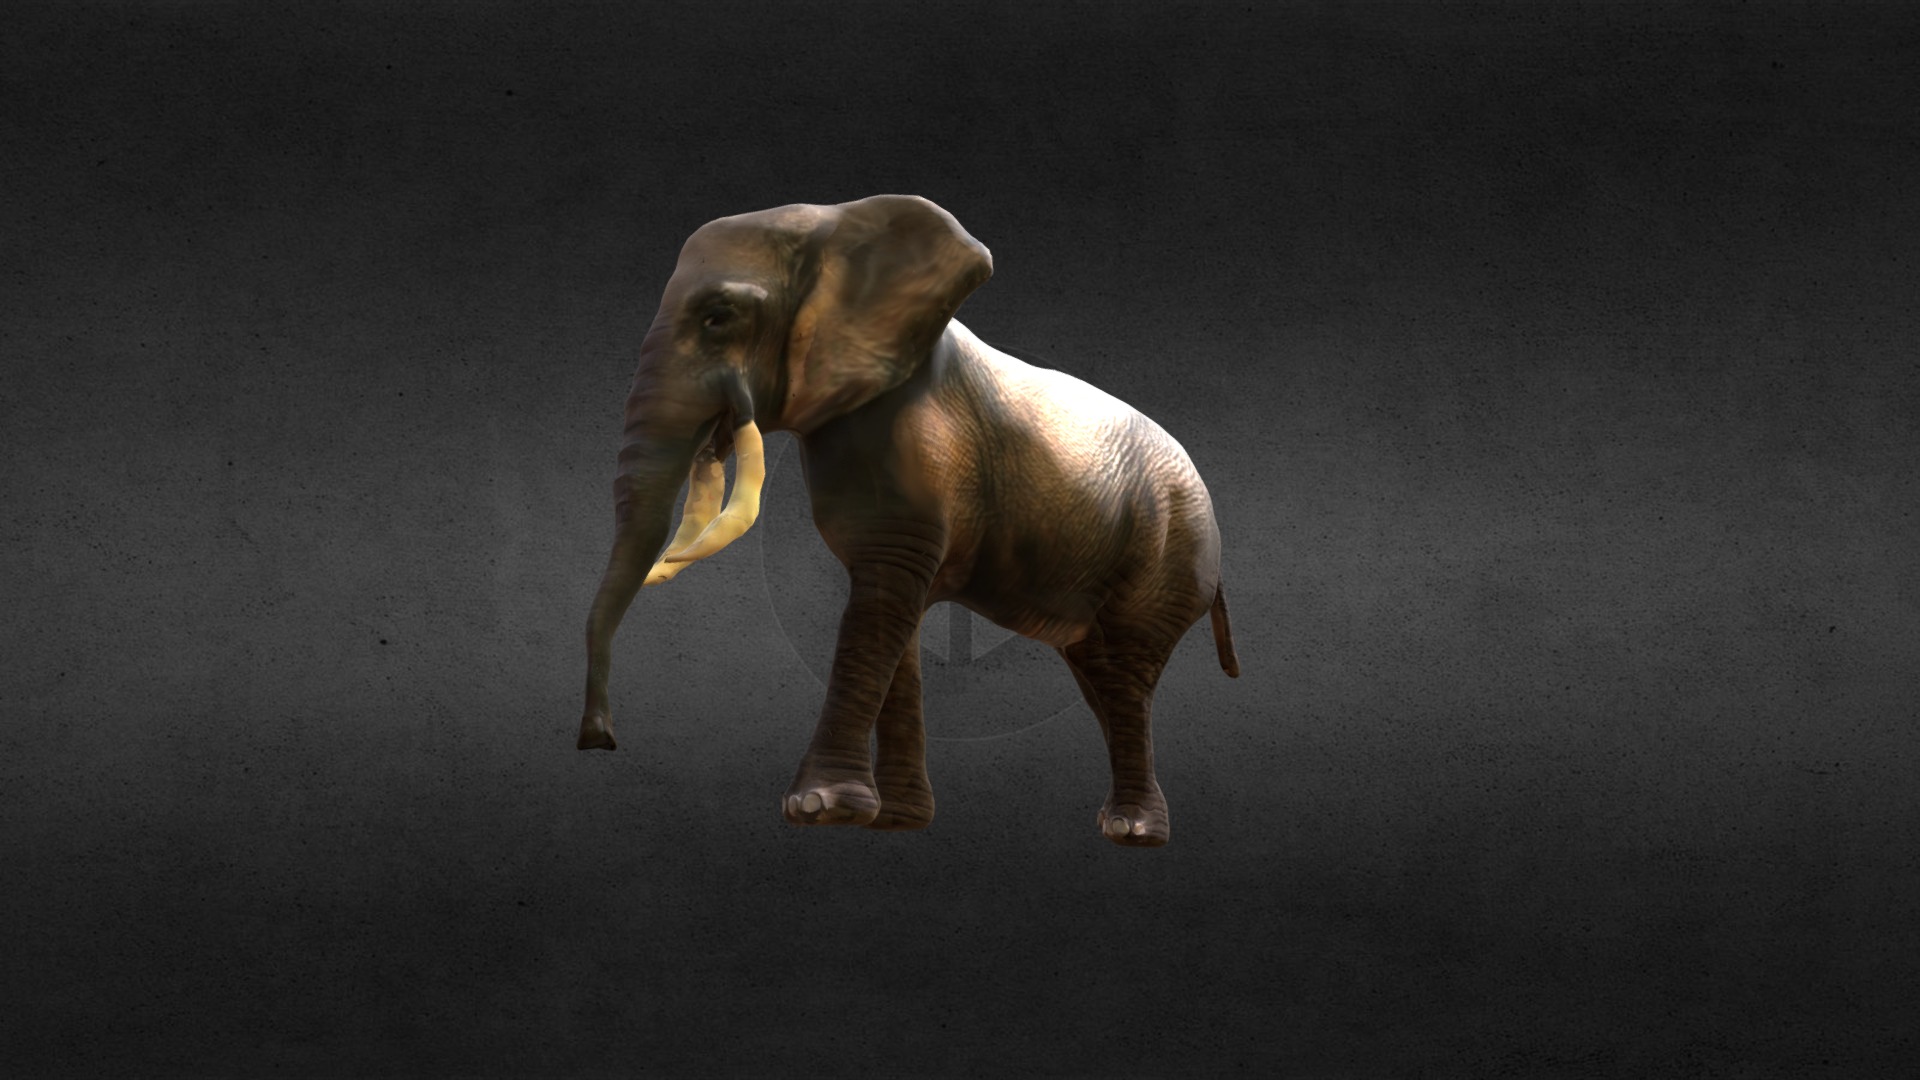 3D model Elephant - This is a 3D model of the Elephant. The 3D model is about an elephant with tusks.